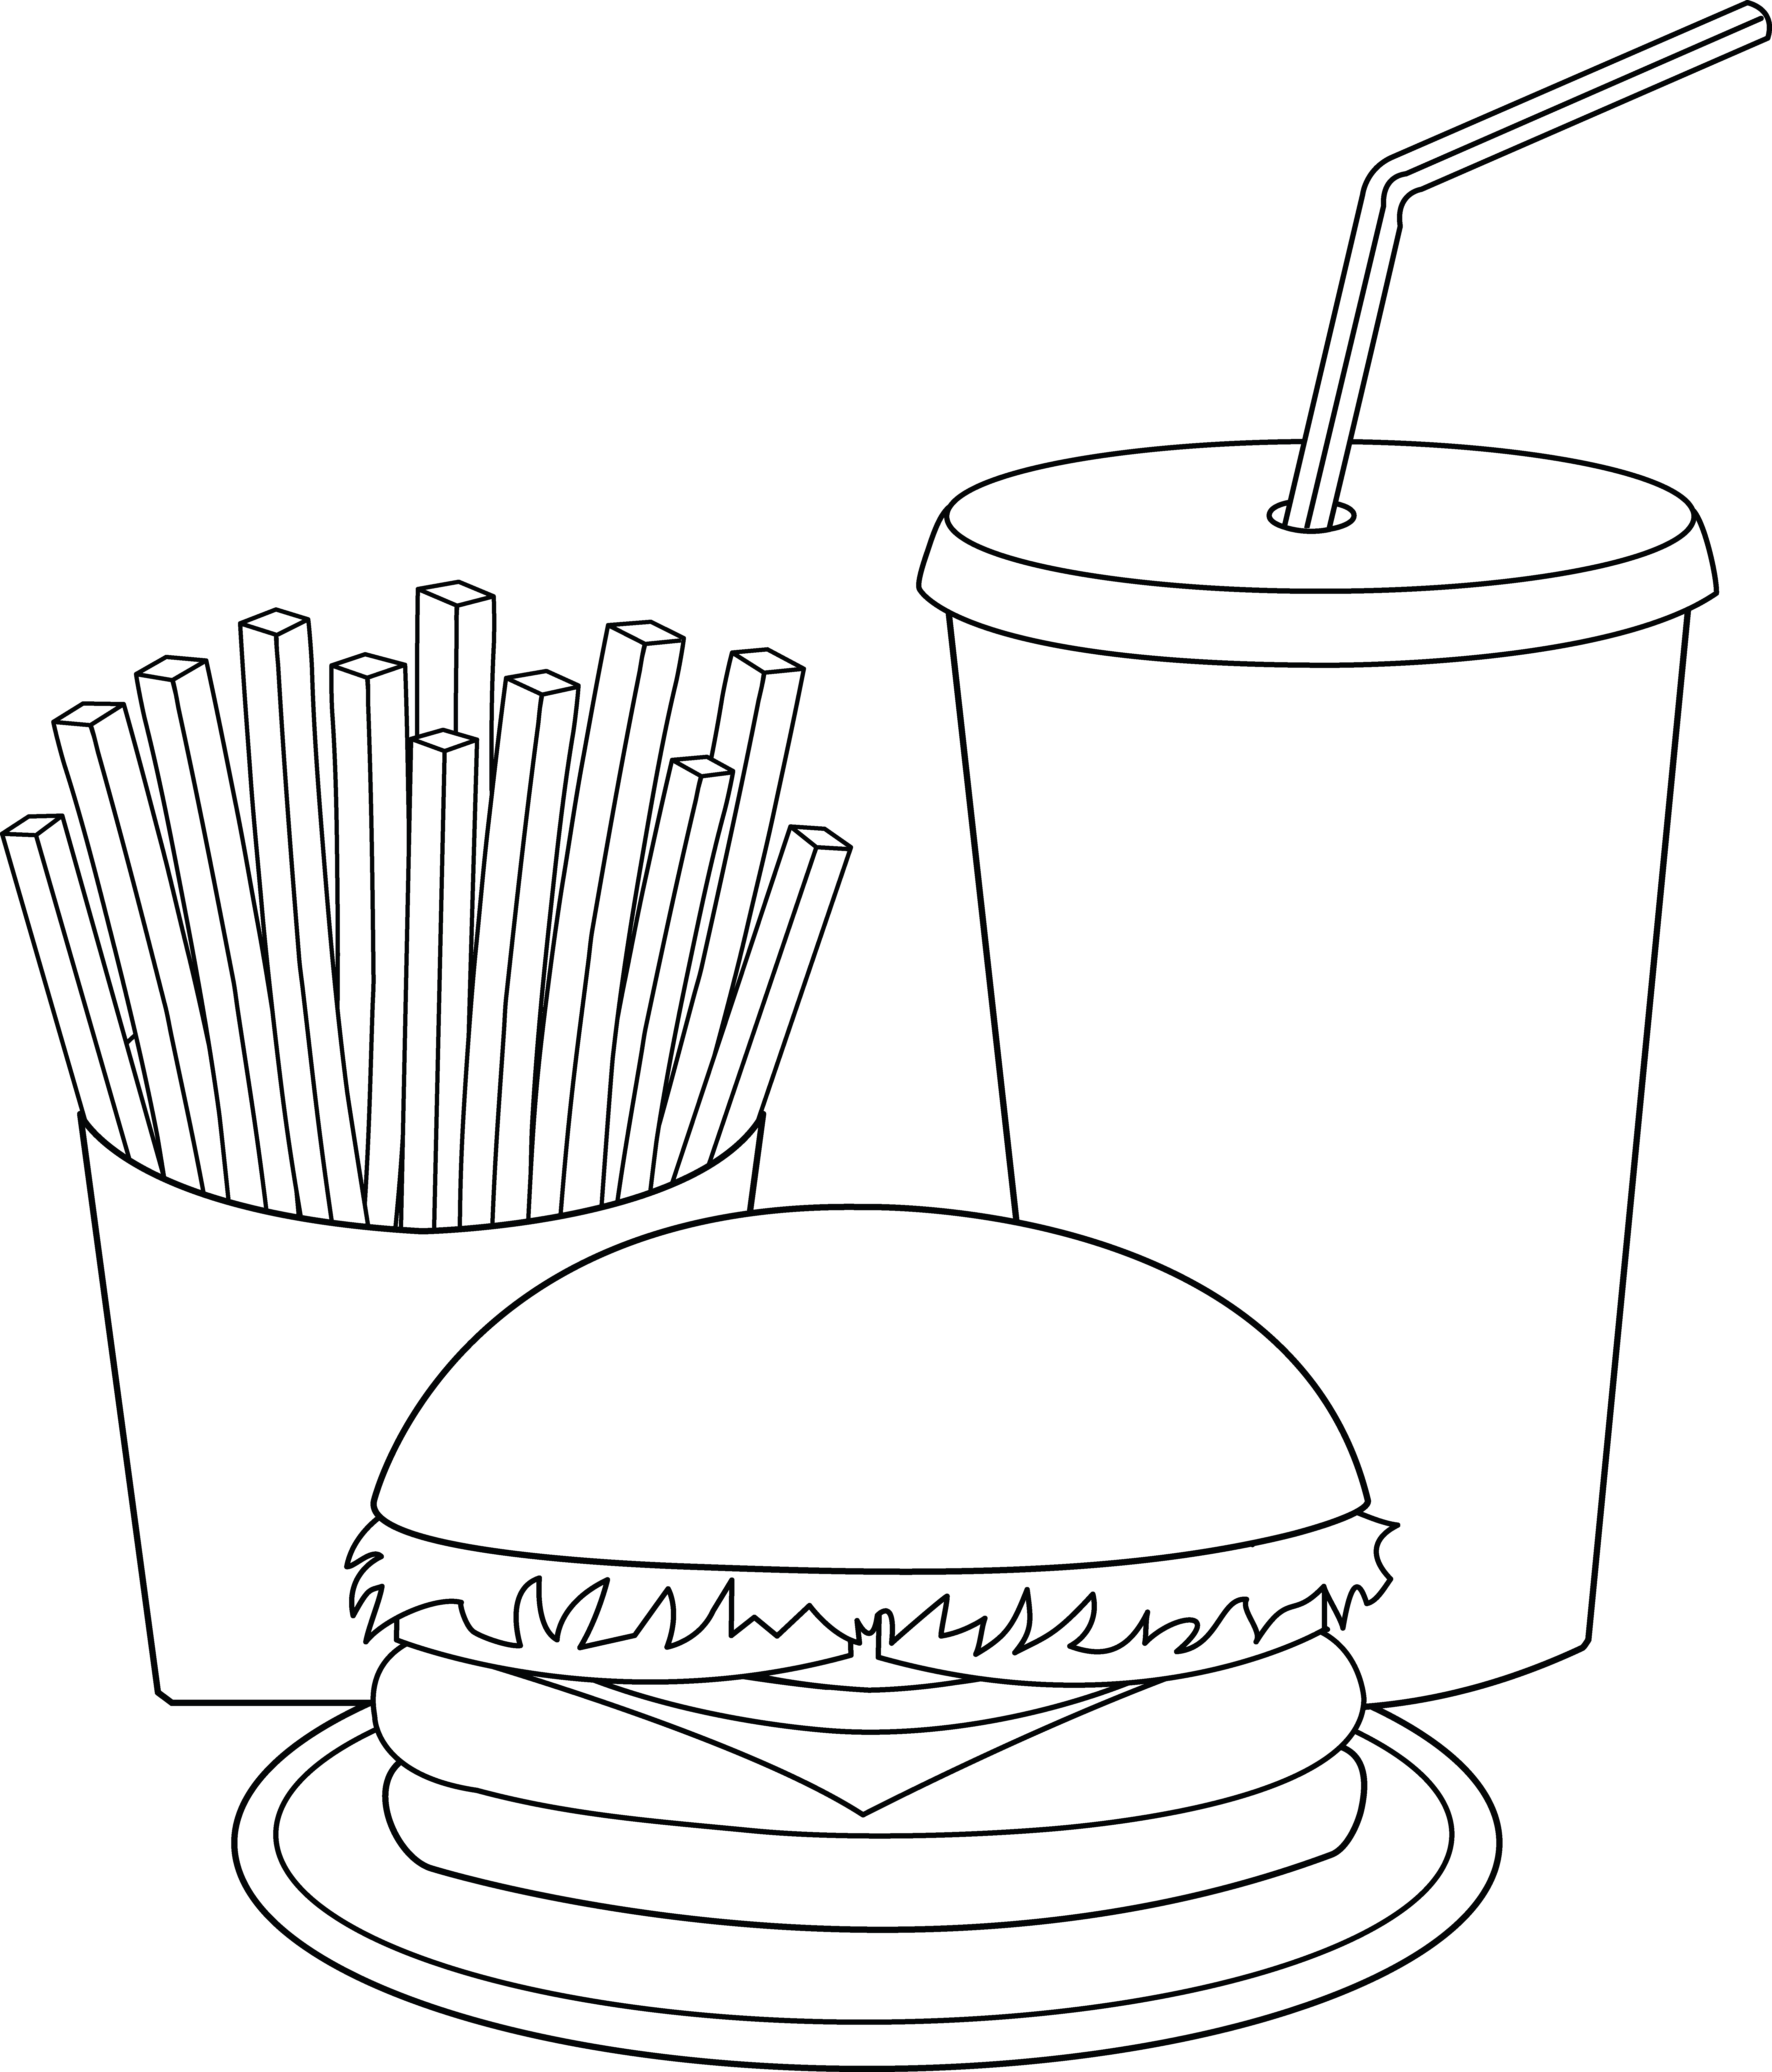 Fast food clipart.